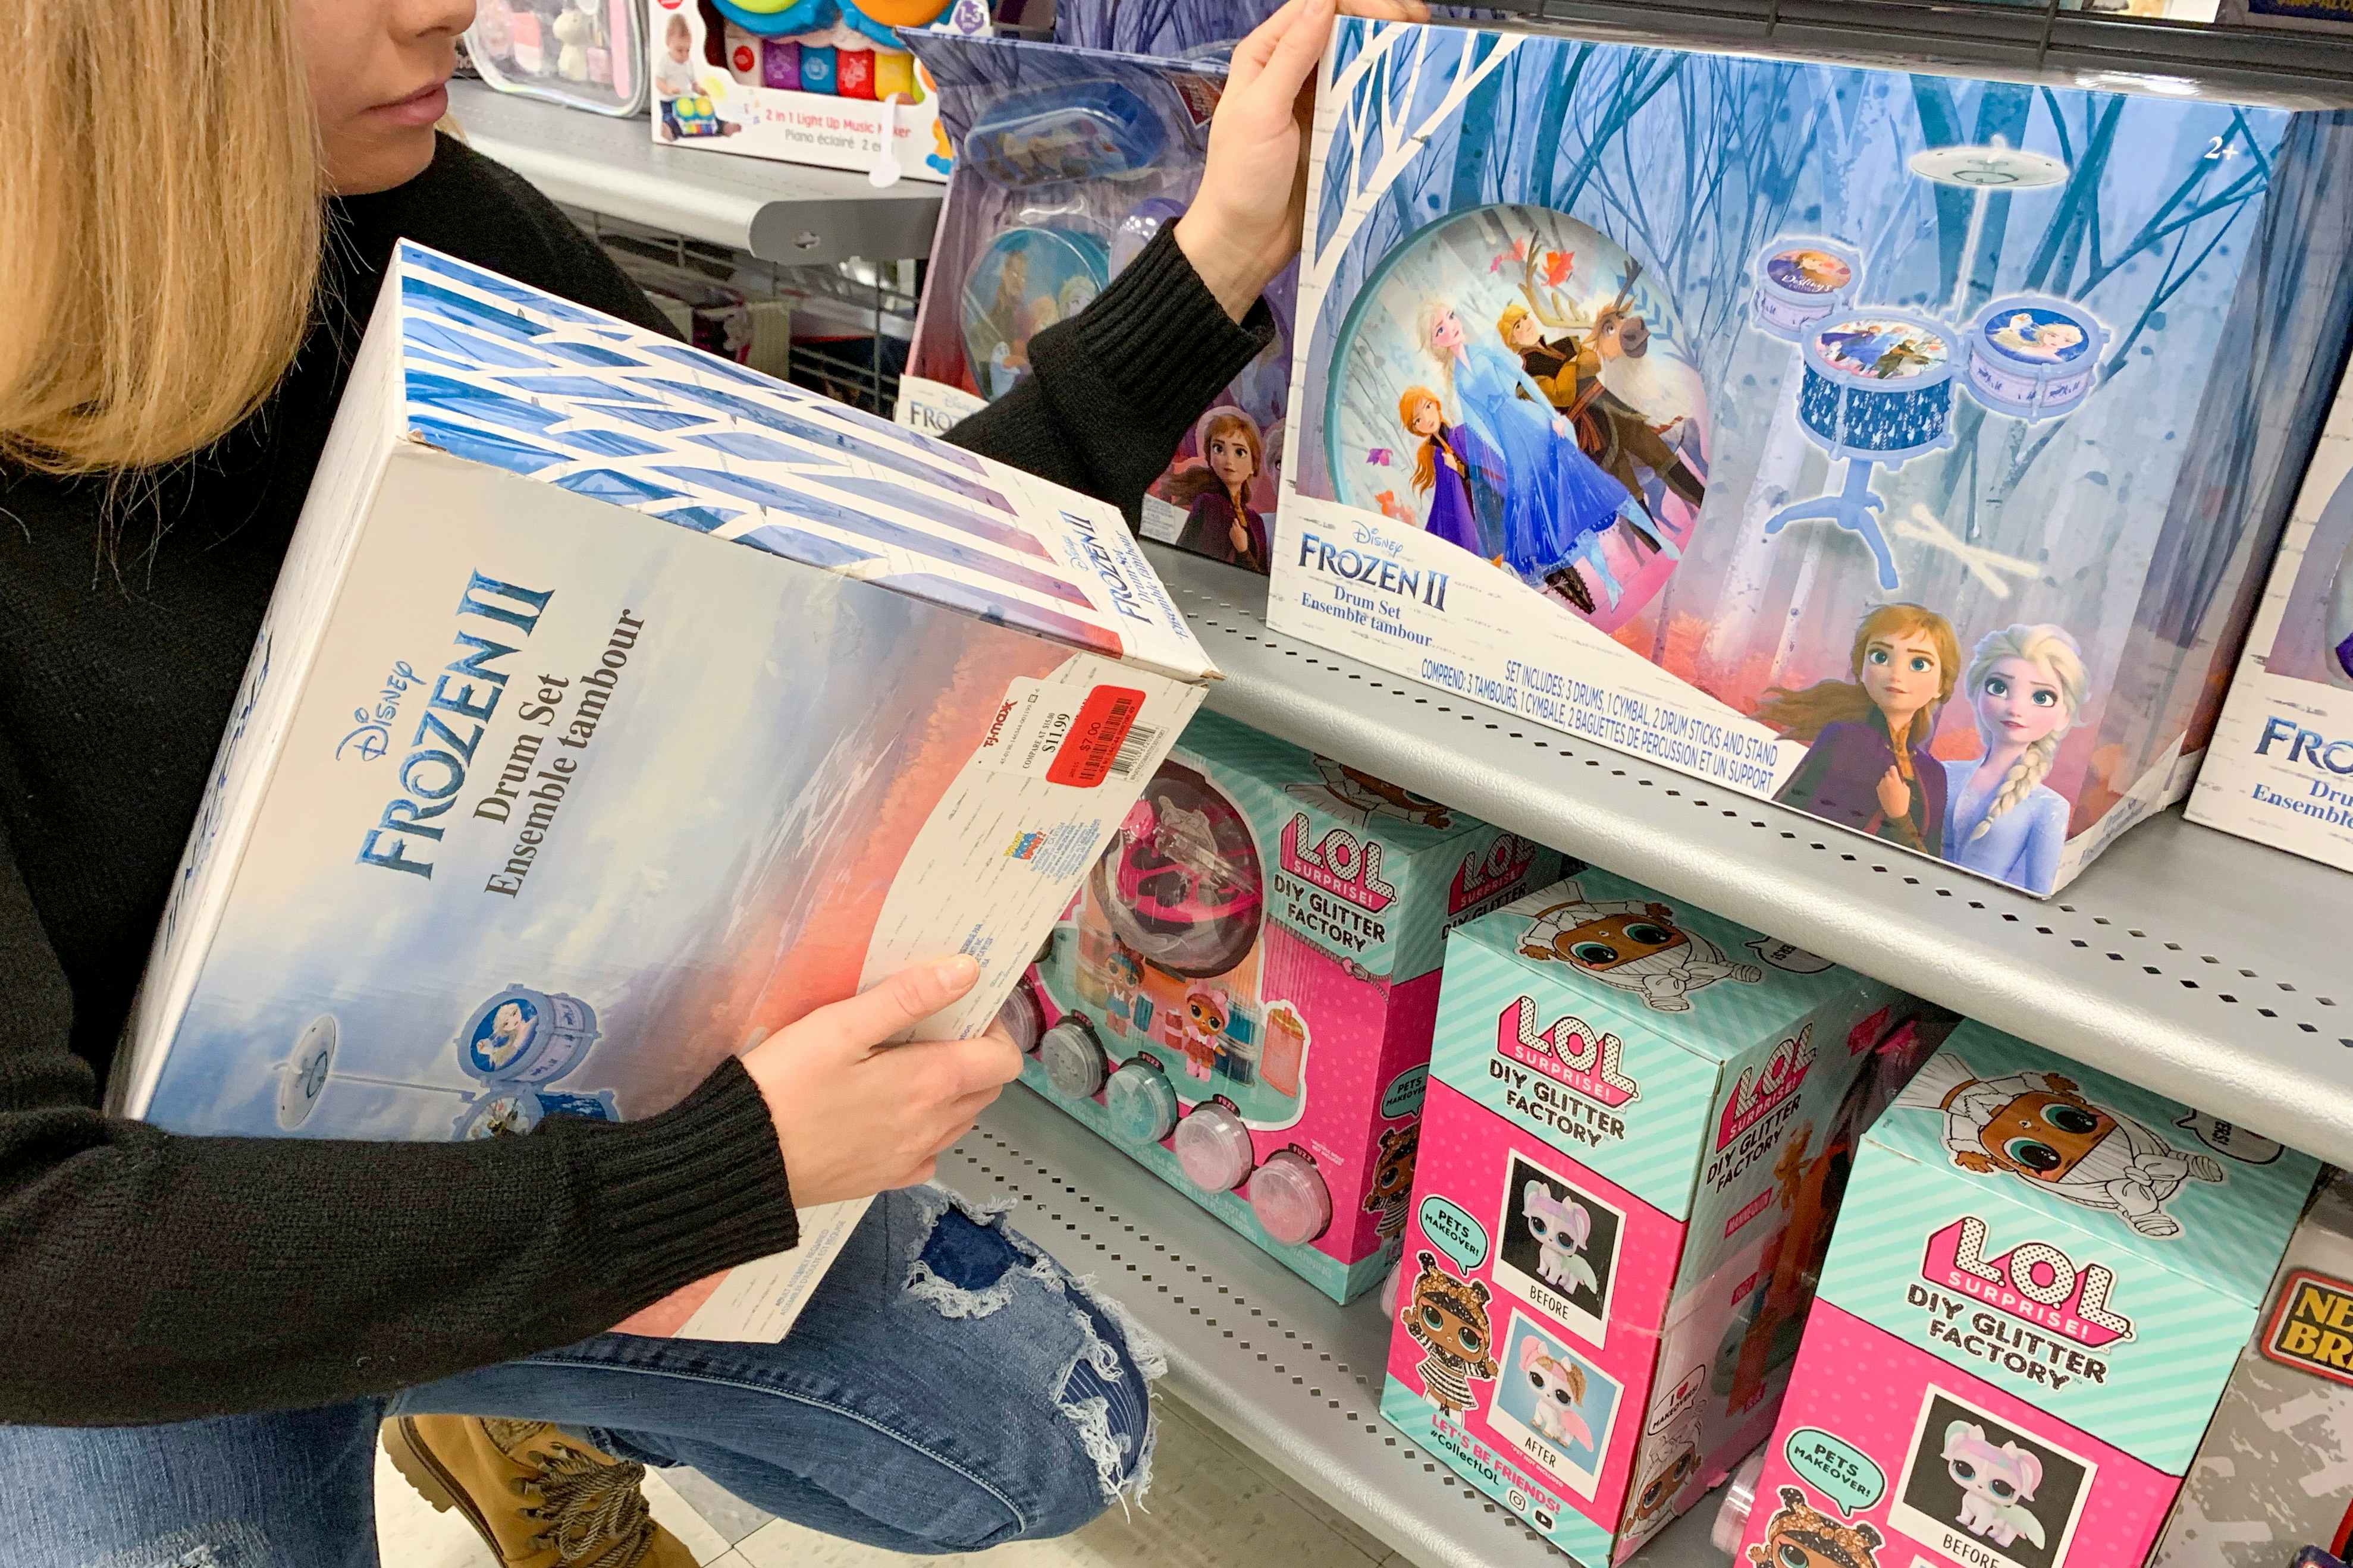 A woman looking at a Disney's Frozen 2 toy drum set.